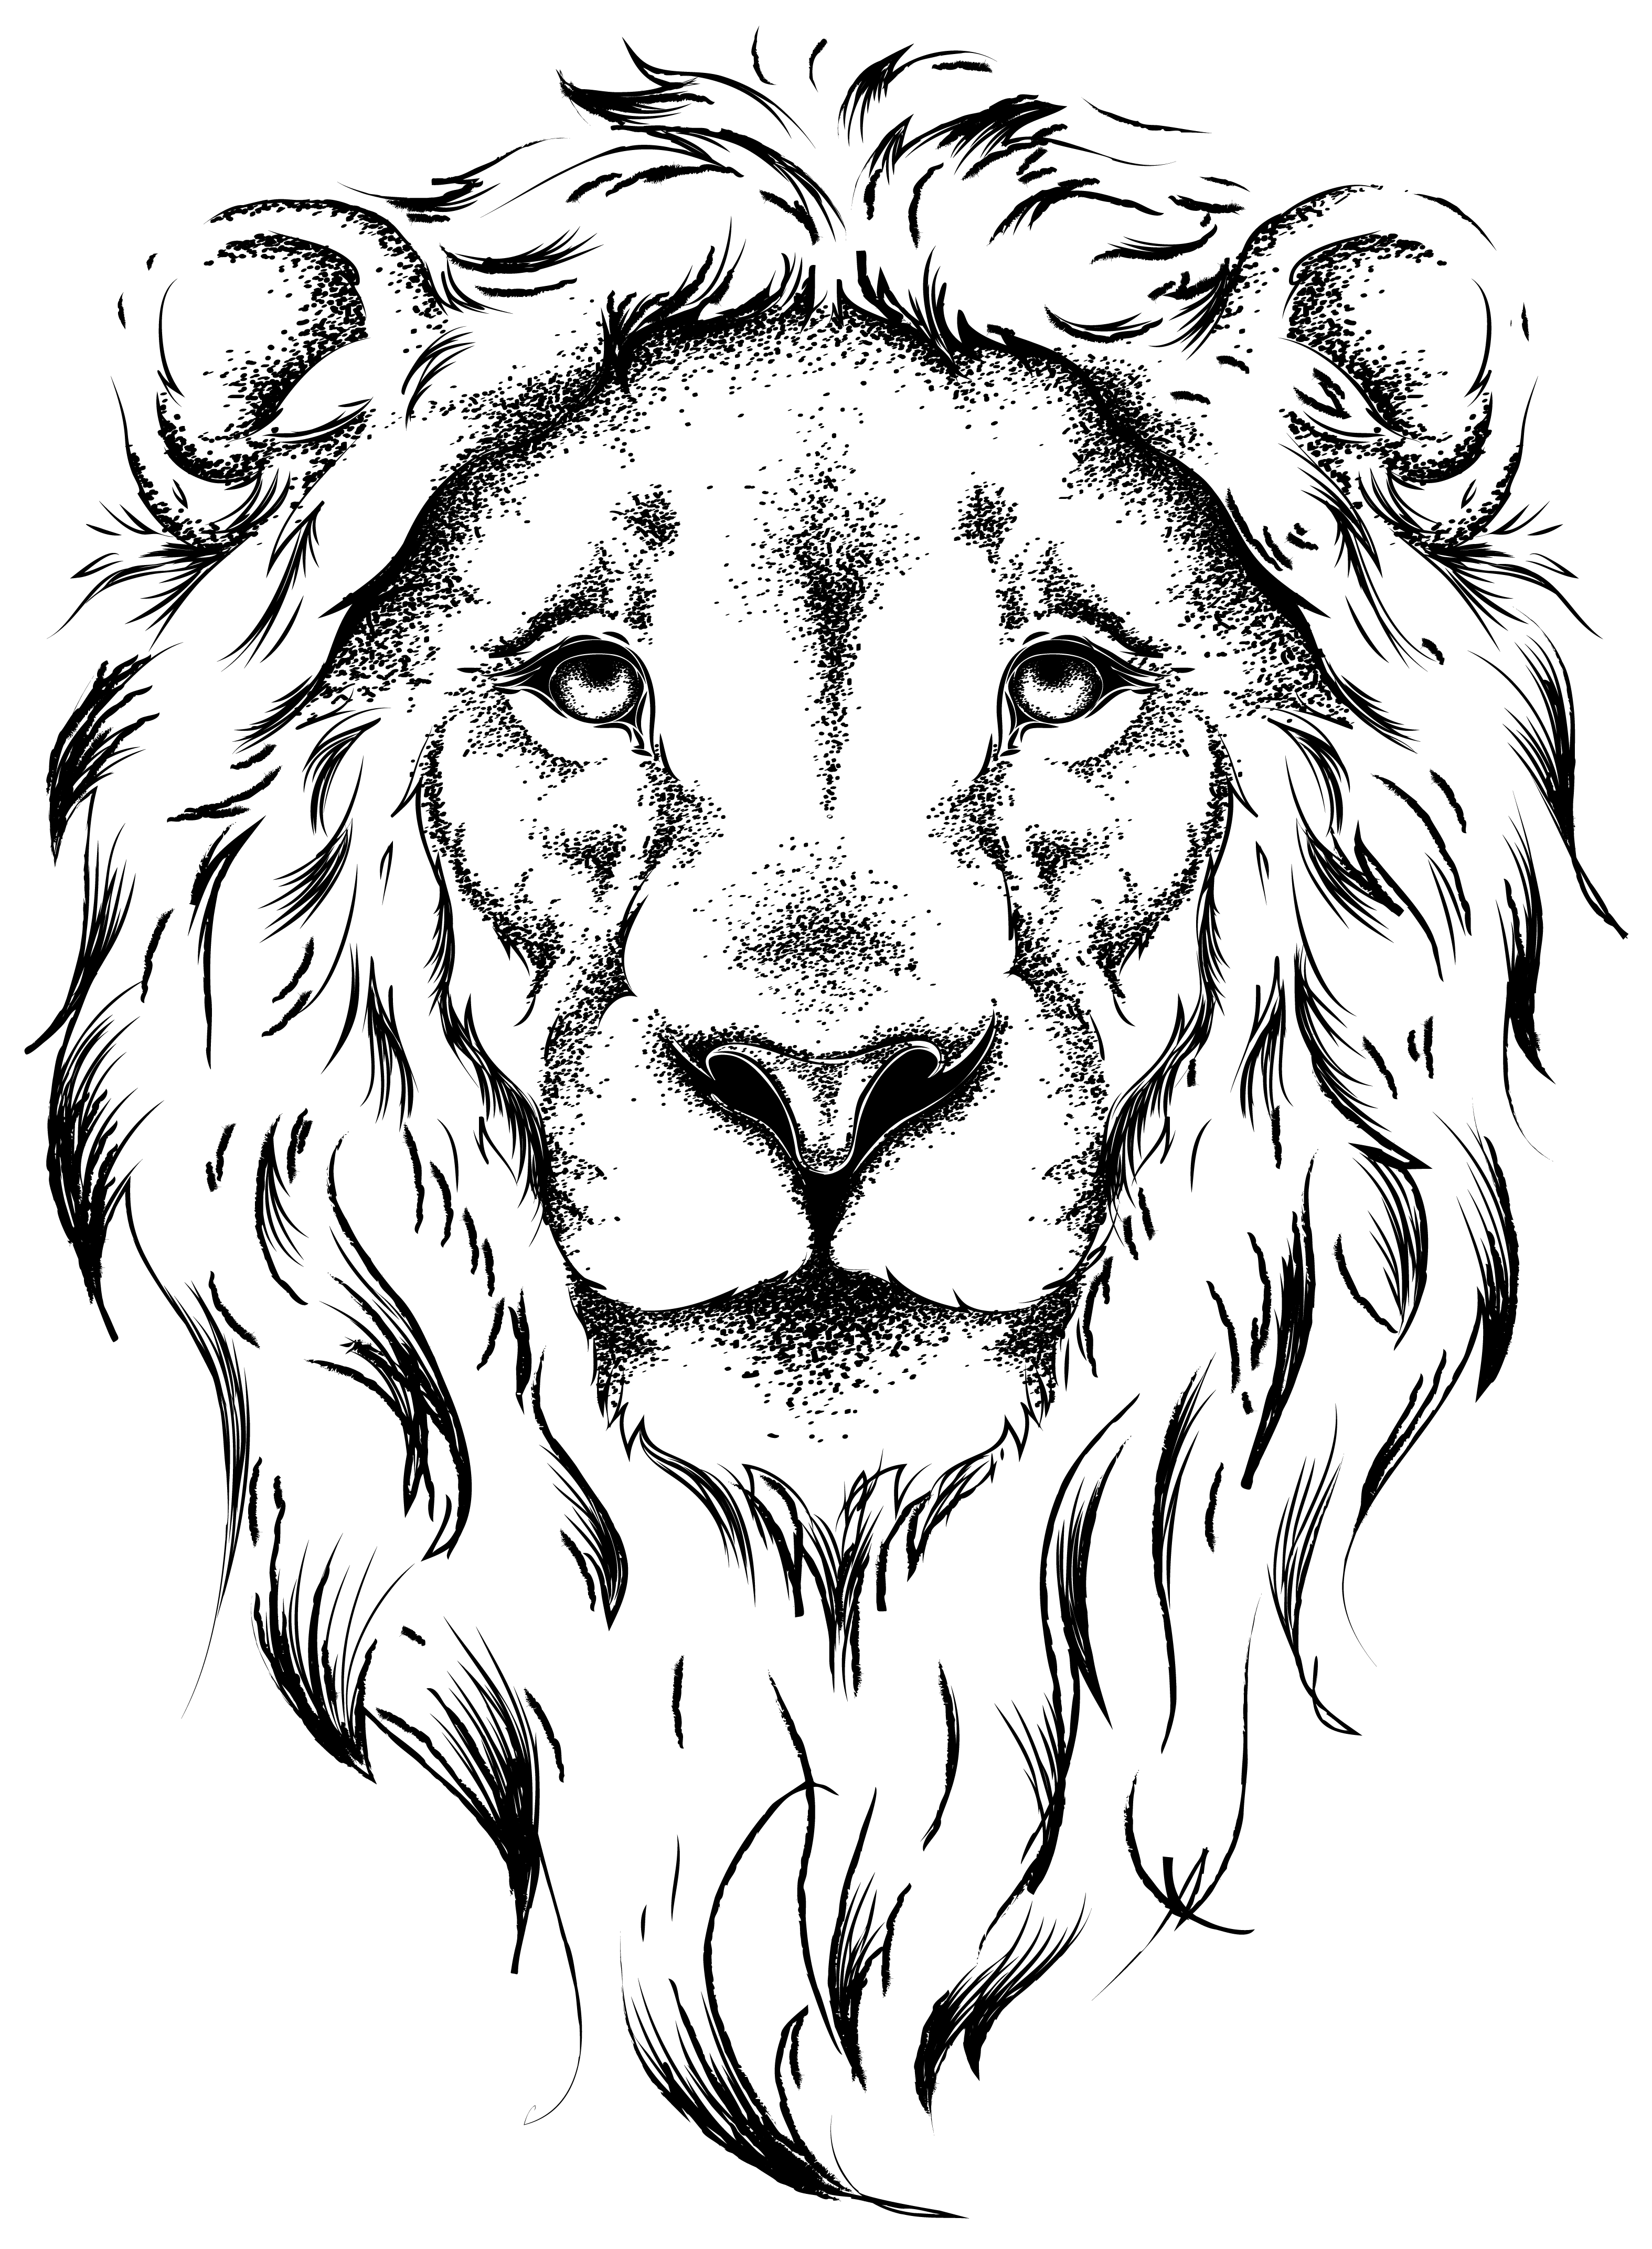 Old School Lion Tattoo Design - Vector Files in Multiple Formats -  DgitalCO's Ko-fi Shop - Ko-fi ❤️ Where creators get support from fans  through donations, memberships, shop sales and more! The